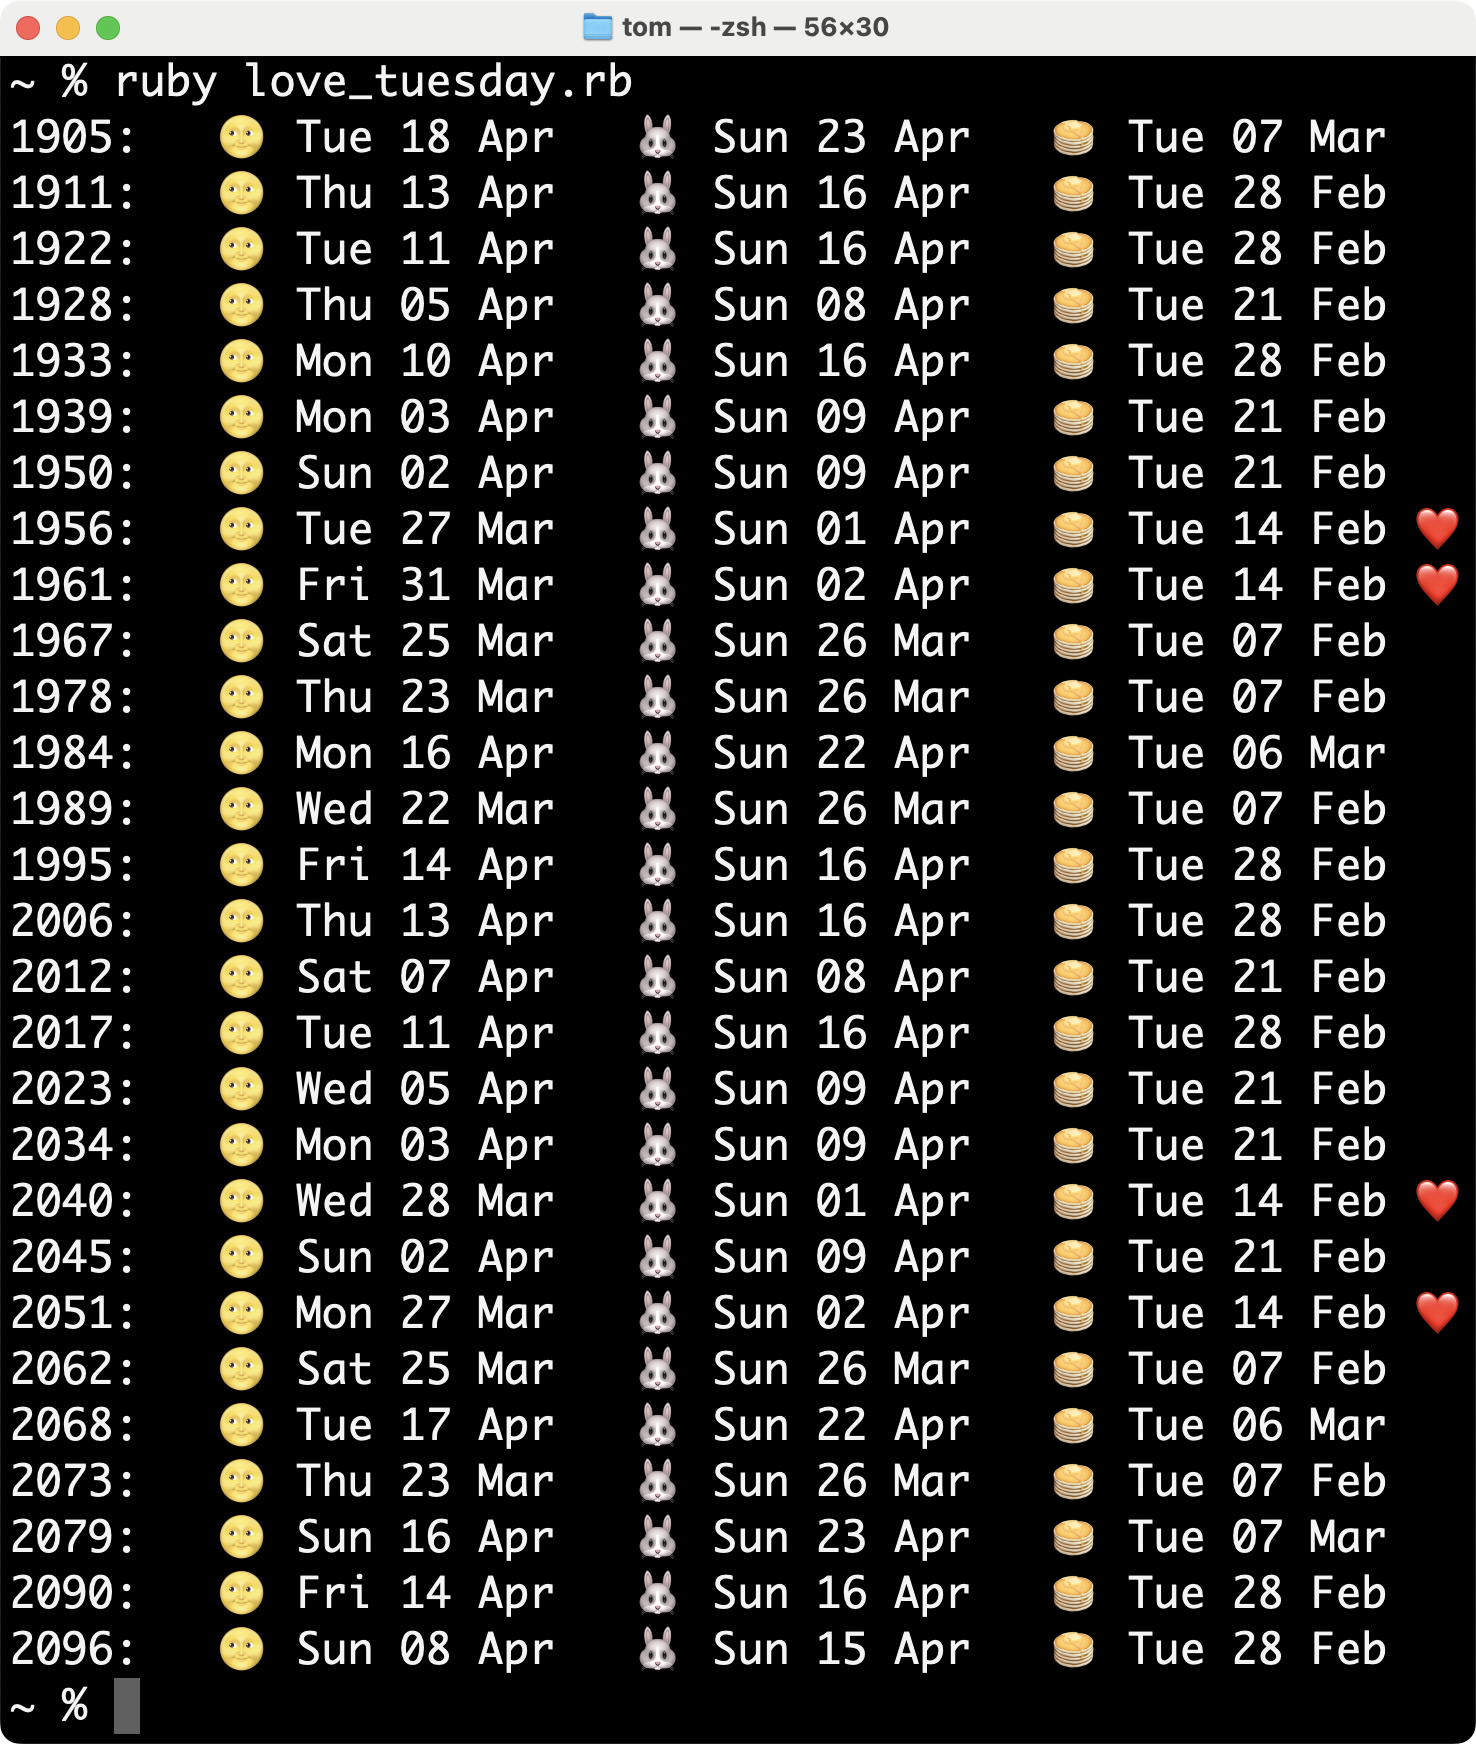 The output of my Ruby program, showing Shrove Tuesday falling on 14 February in 1956, 1961, 2040 and 2051